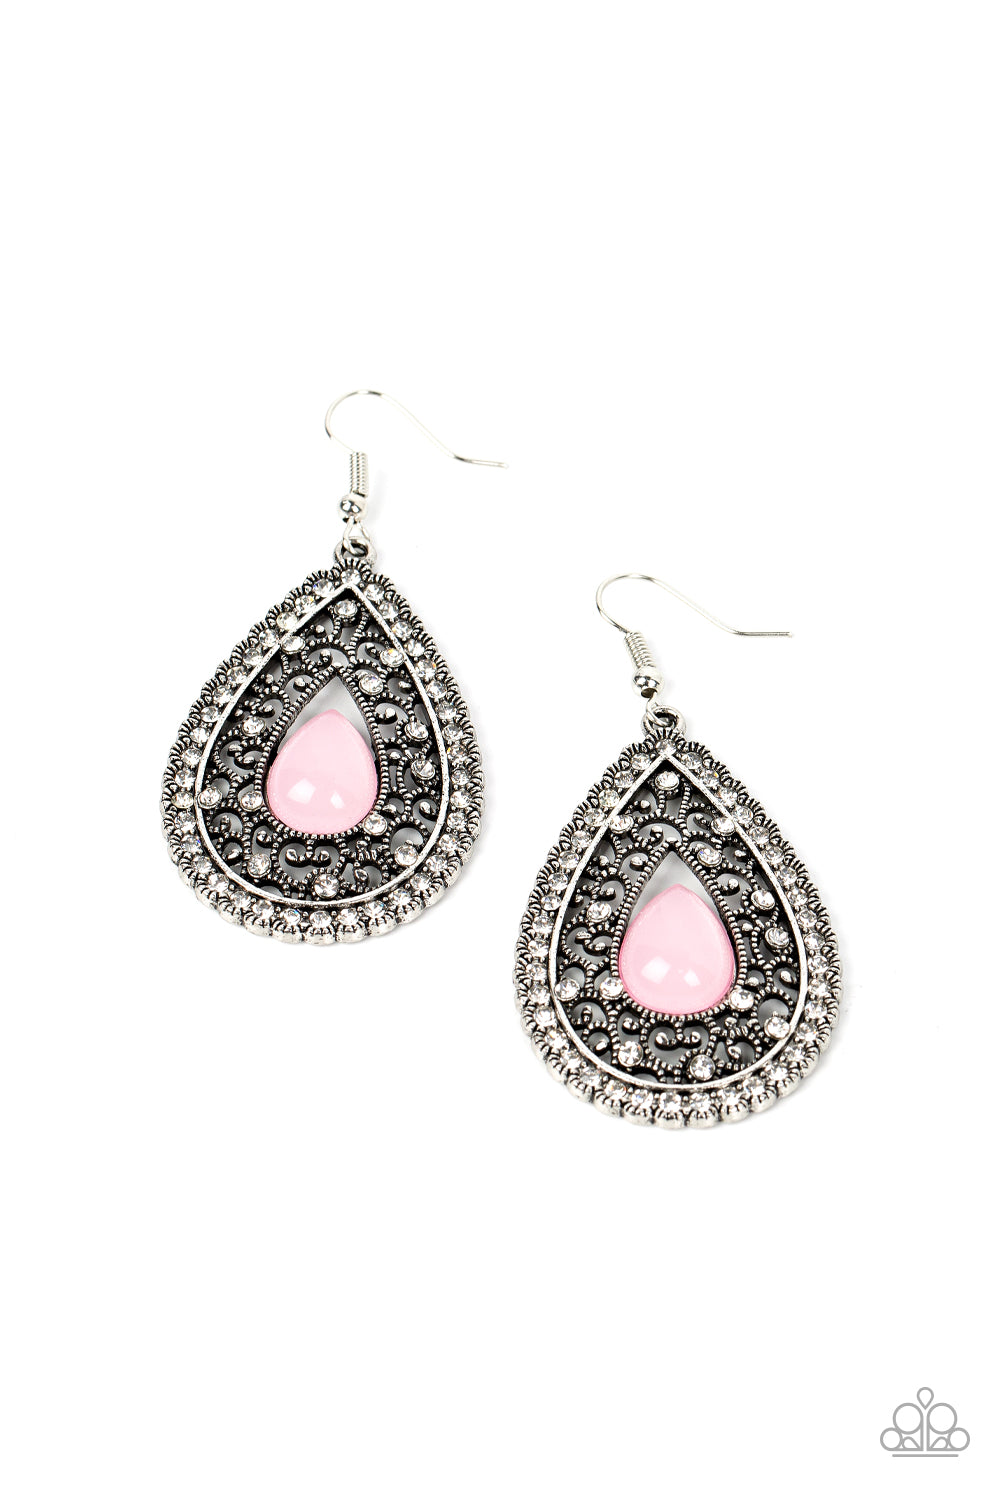 Cloud Nine Couture - Pink Earring